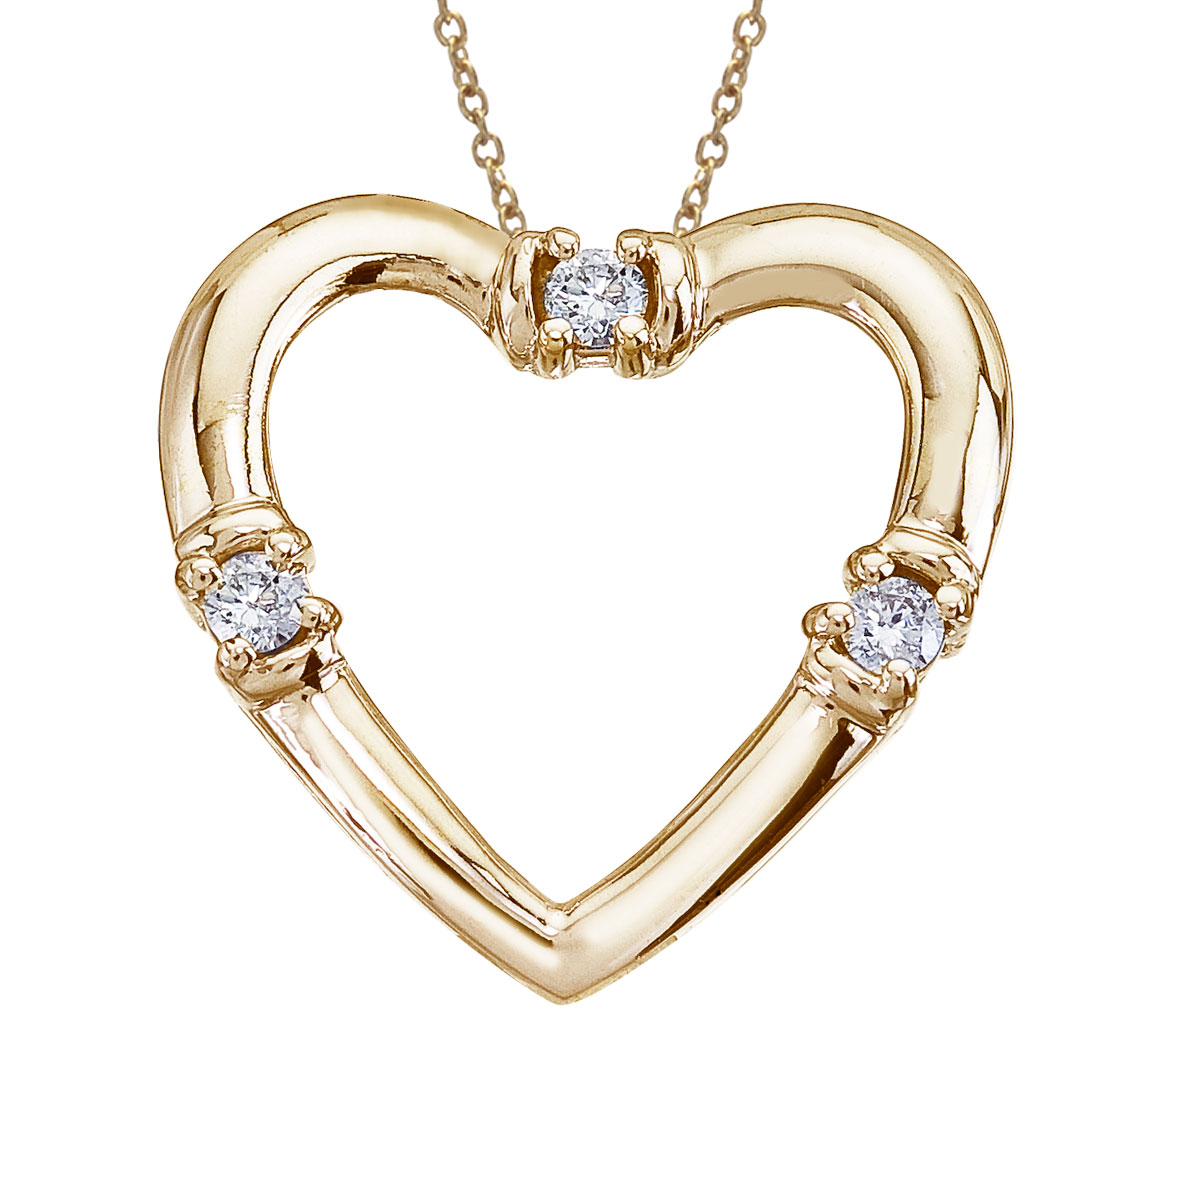 Heart shaped 14k yellow gold pendant with radiant diamonds to symbolize true love.